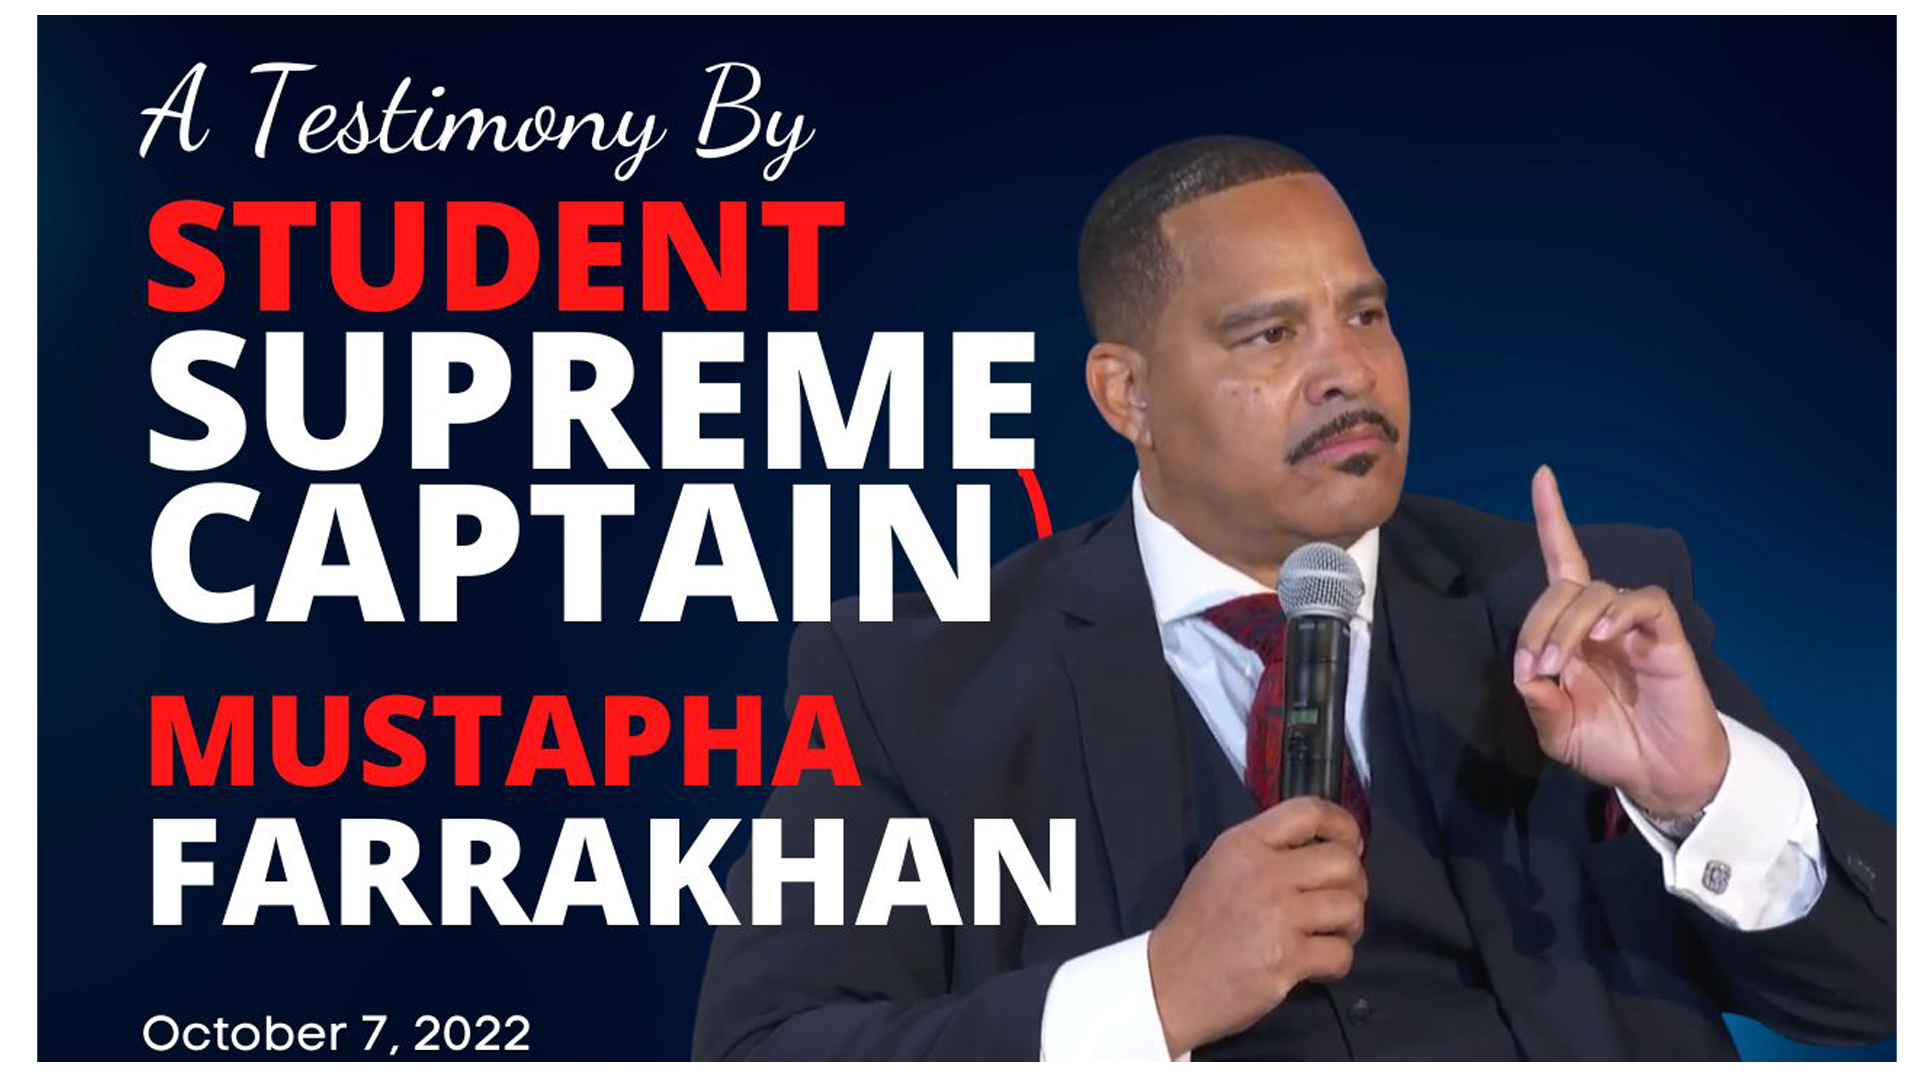 A Testimony By Student Supreme Captain Mustapha Farrakhan